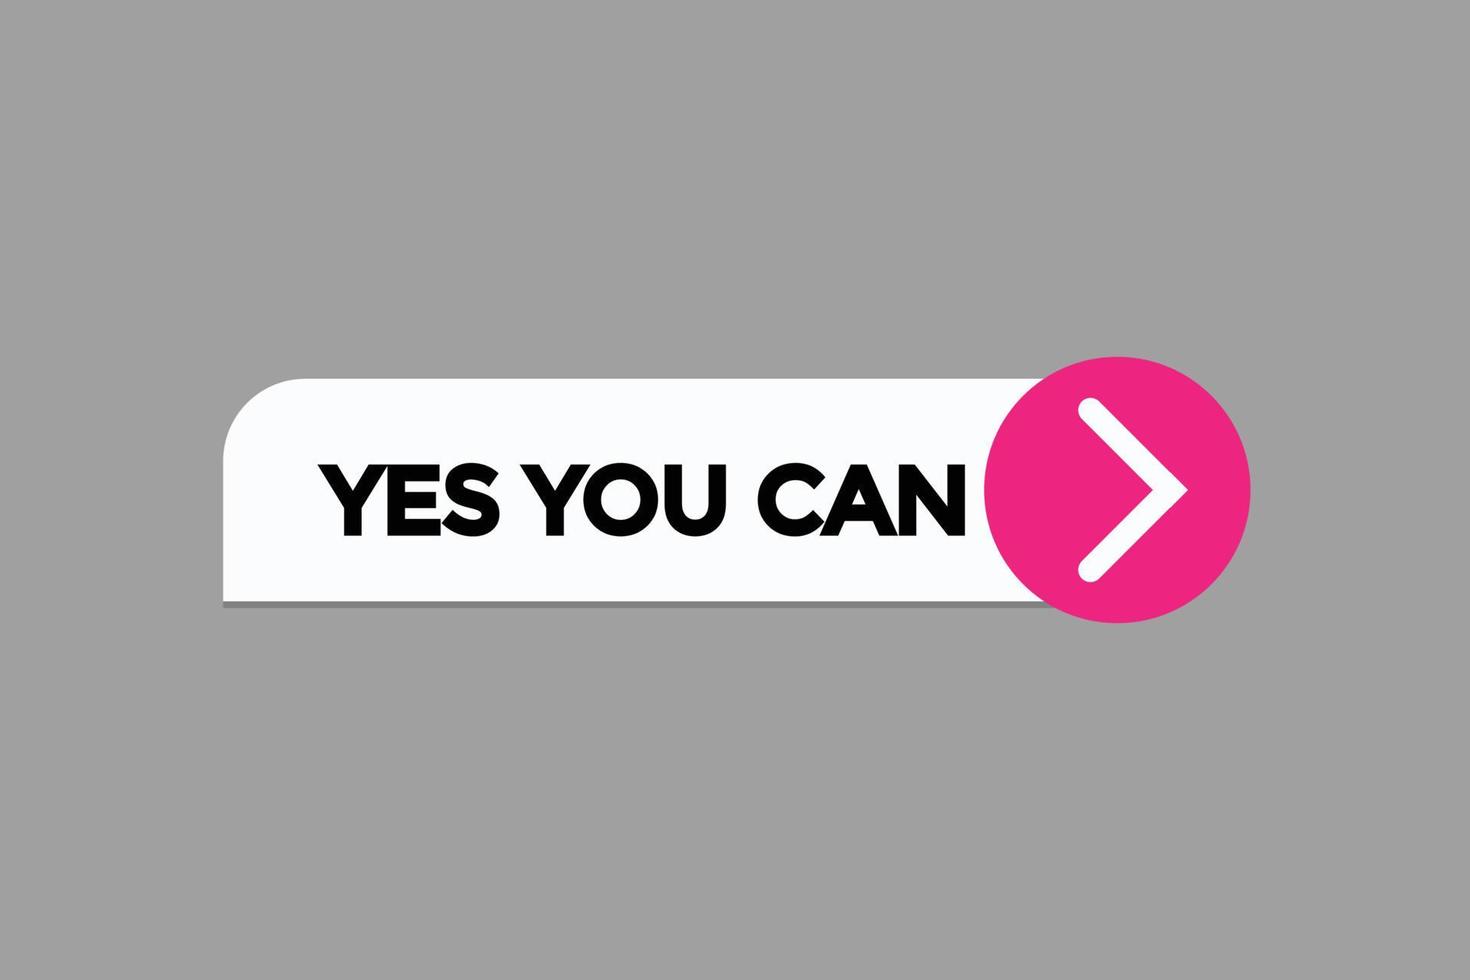 yes you can button vectors.sign label speech bubble yes you can vector